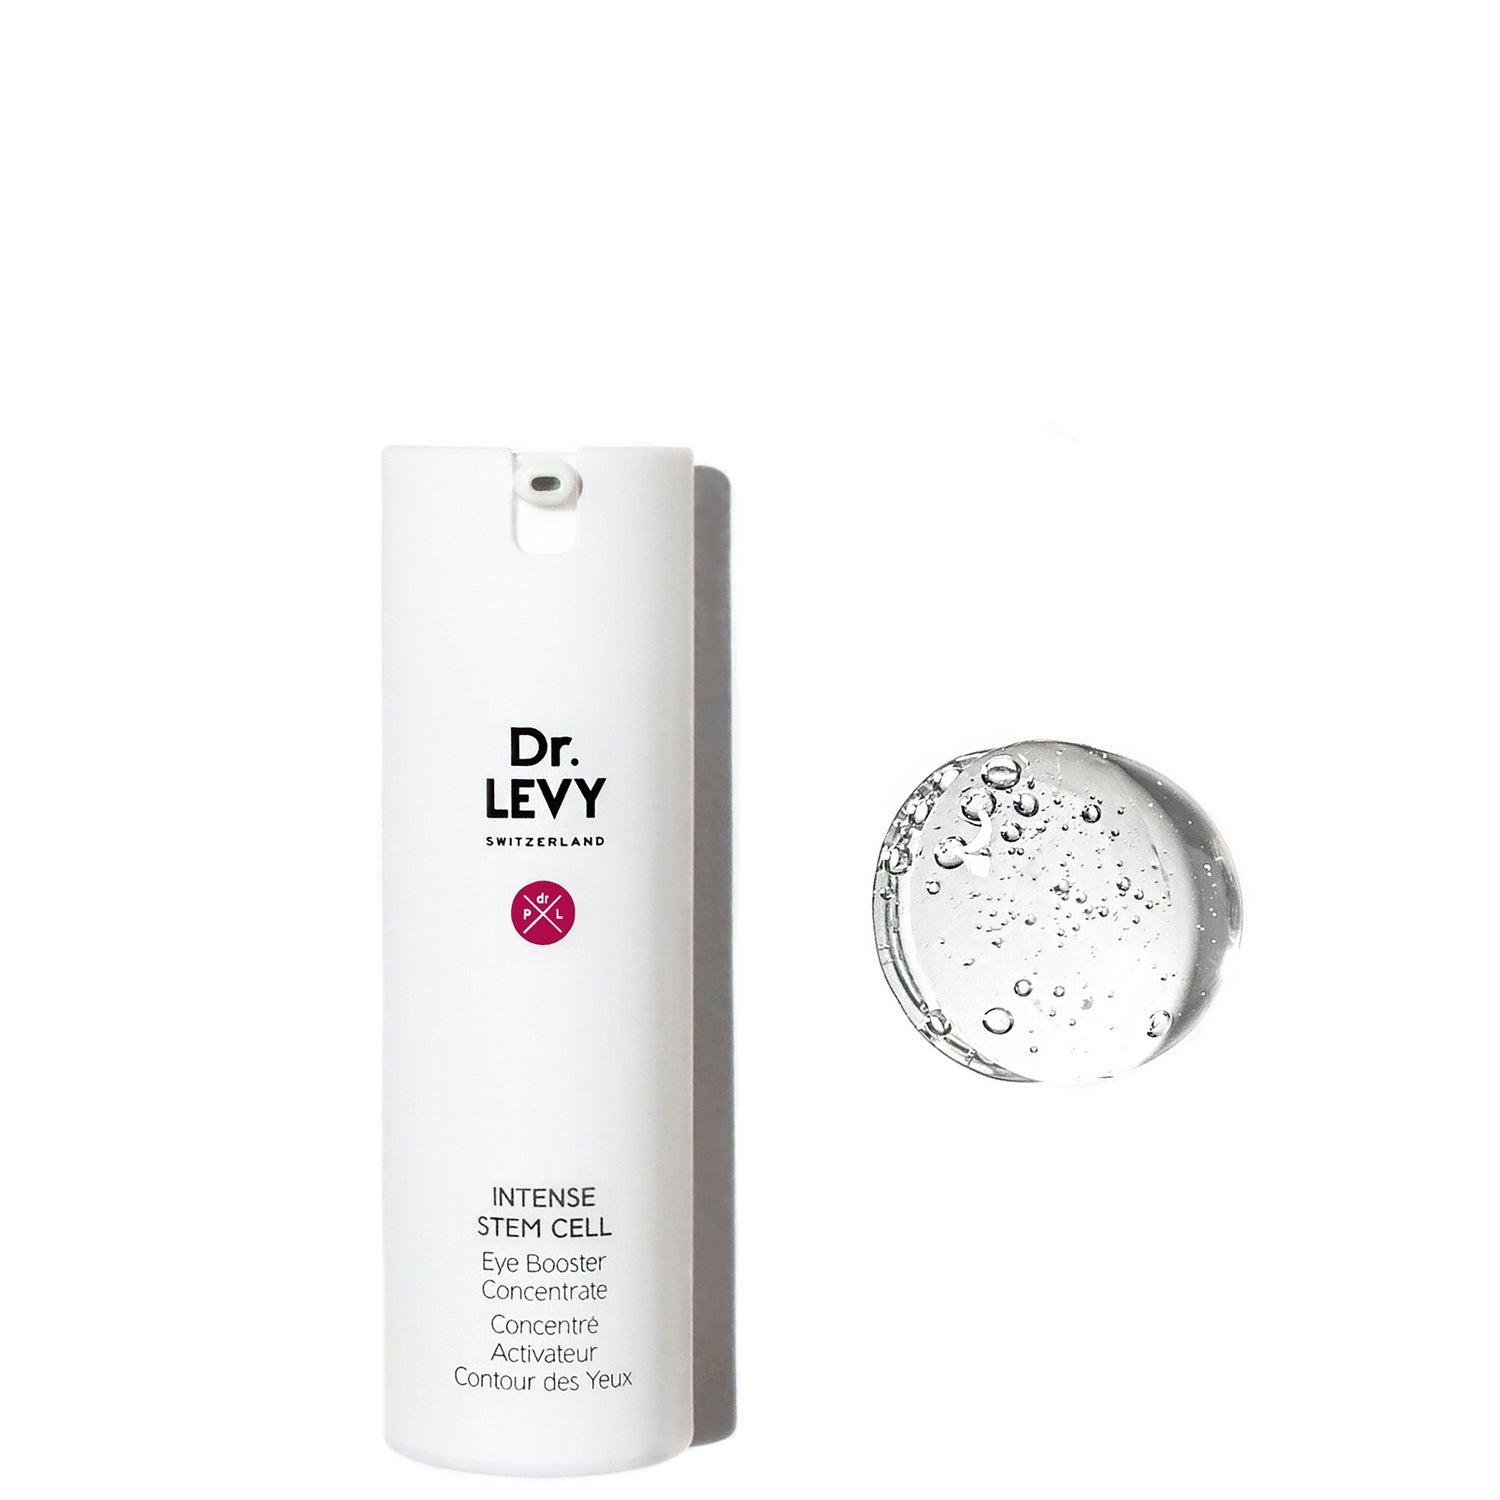 Dr. LEVY Switzerland Eye Booster Concentrate 7ml